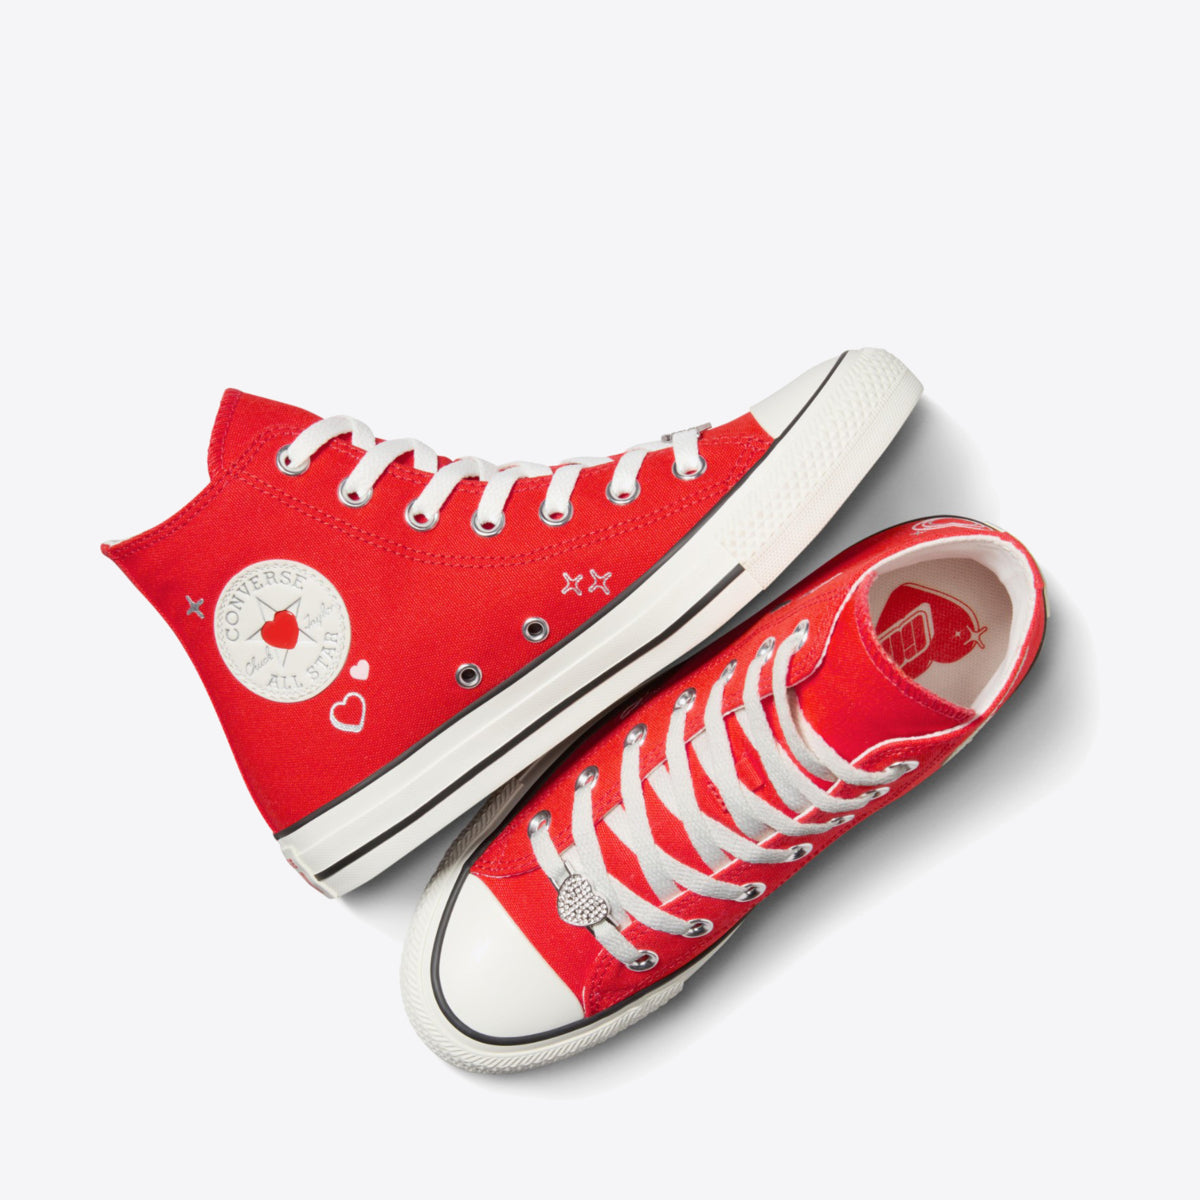 CONVERSE Chuck Taylor All Star BEMY2K High Fever Dream/Vintage White - Image 5